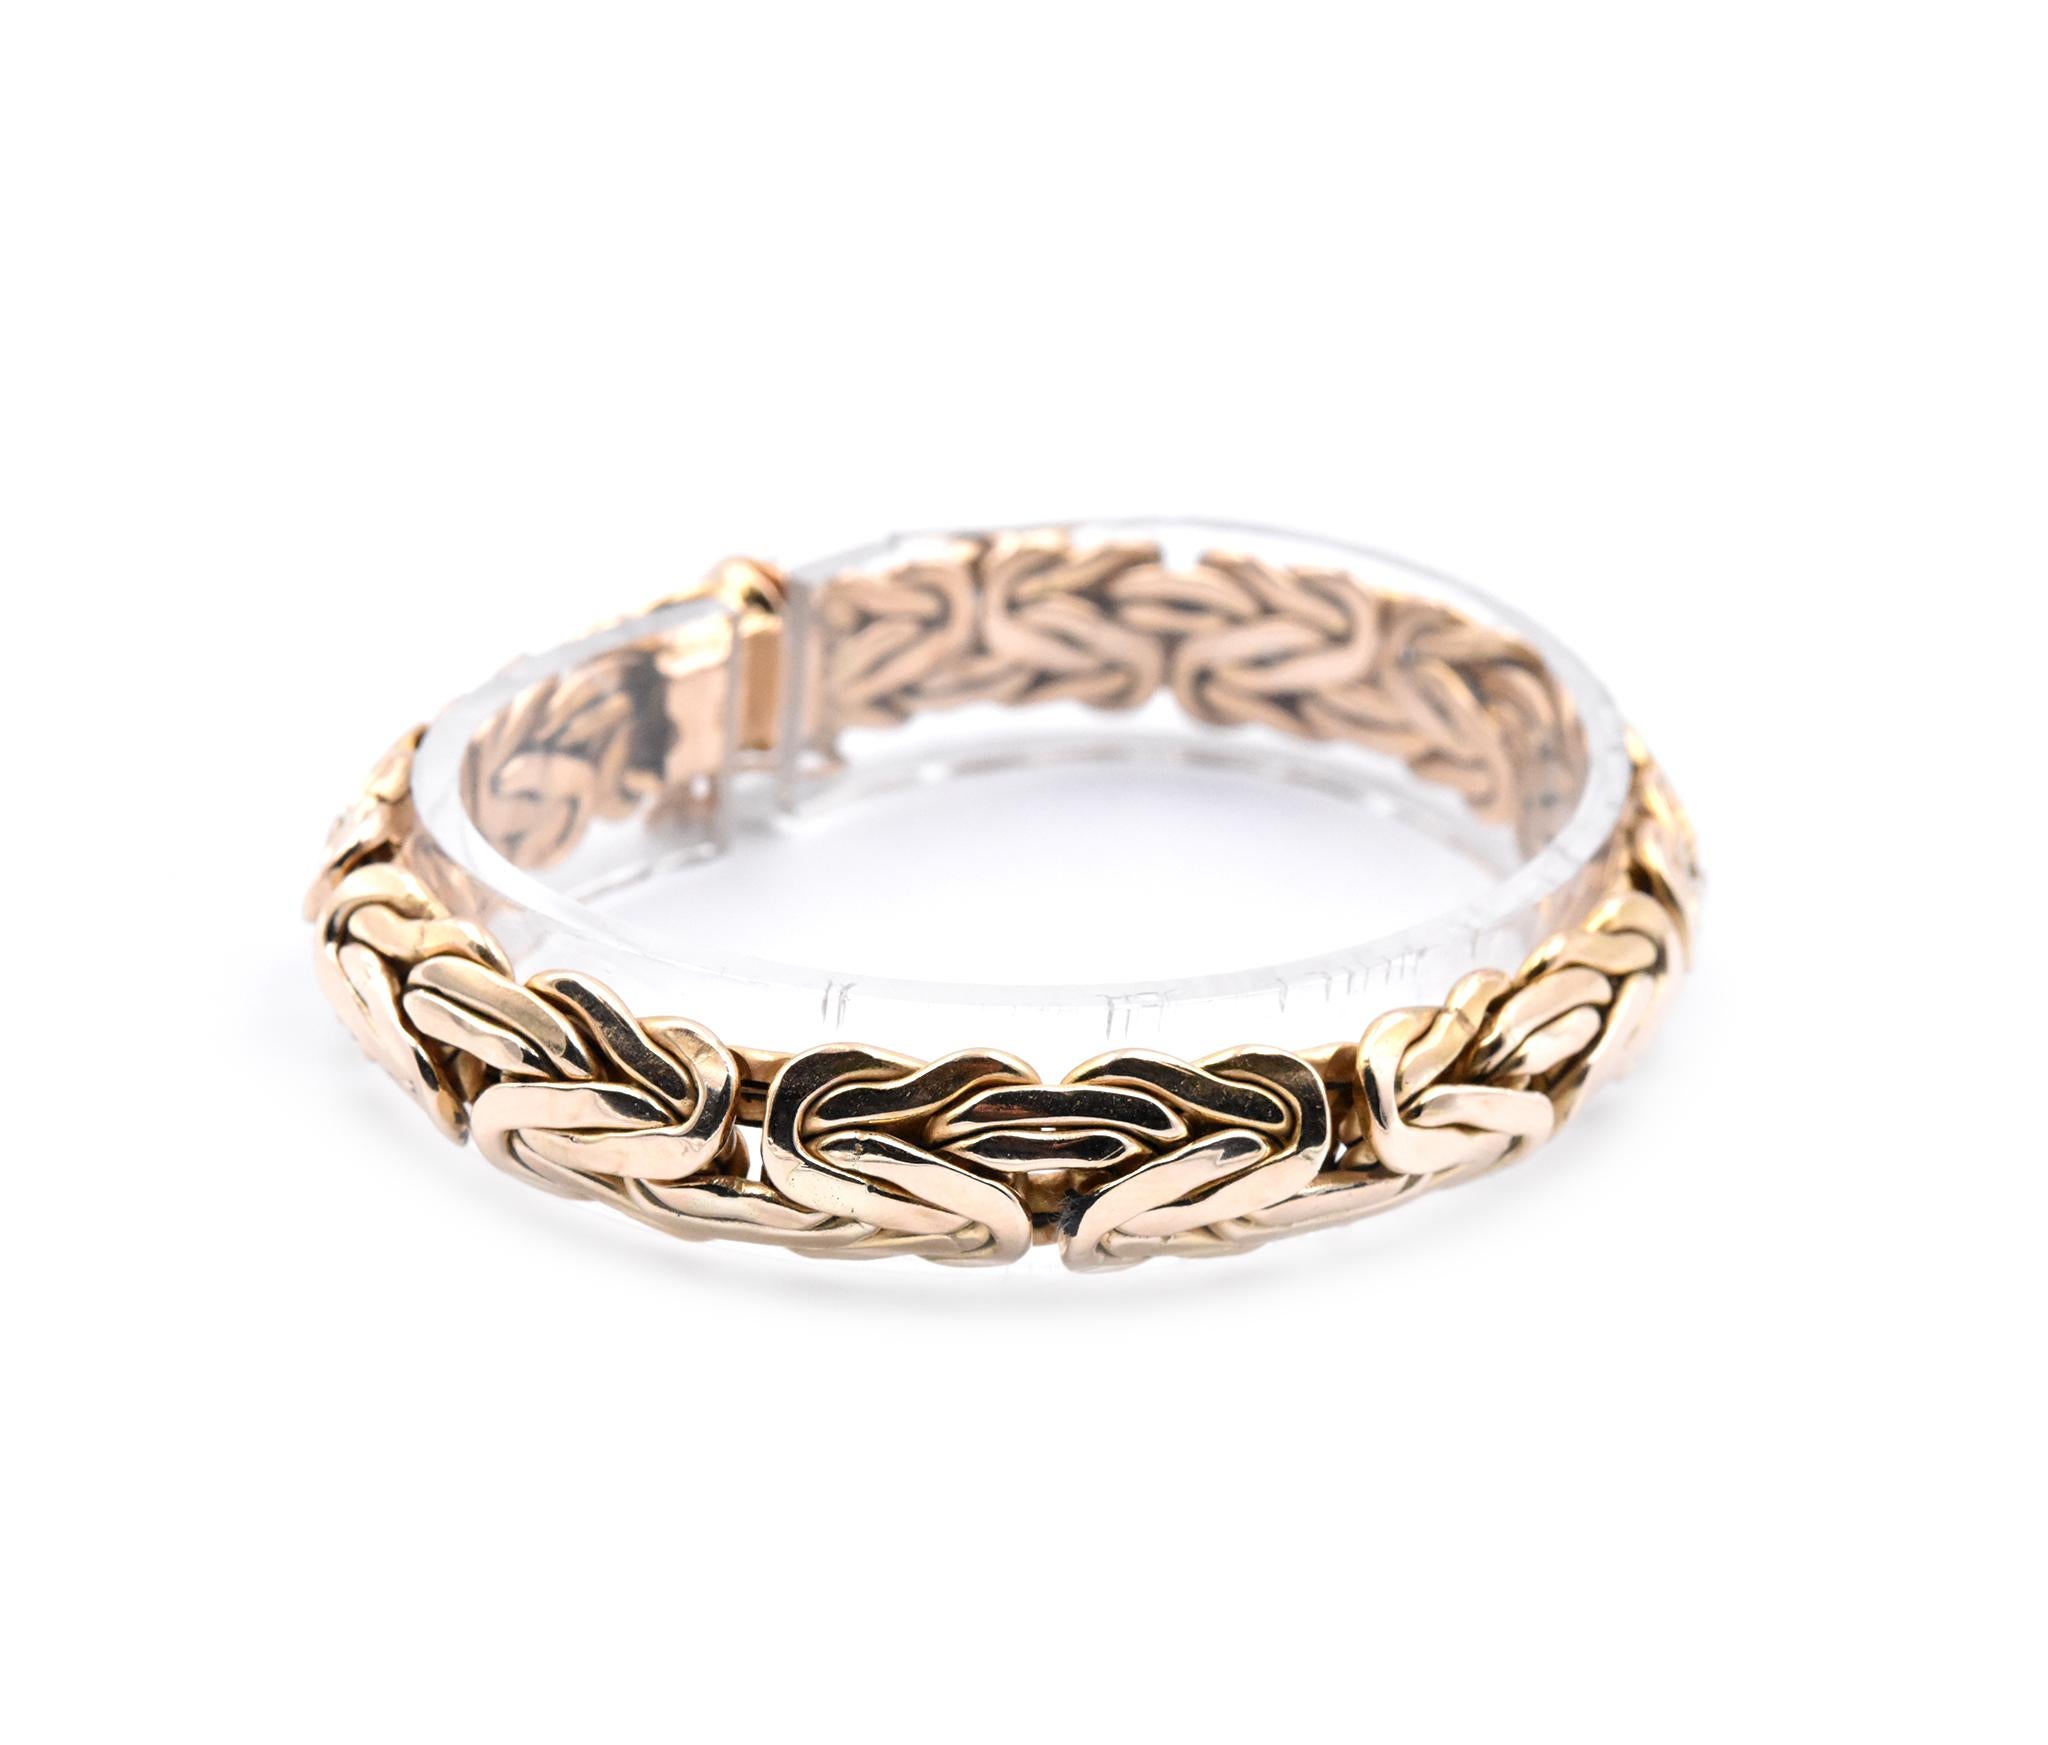 Material: 14k yellow gold
Dimensions: bracelet measures 7.5-inches in length
Weight: 18.10 grams
